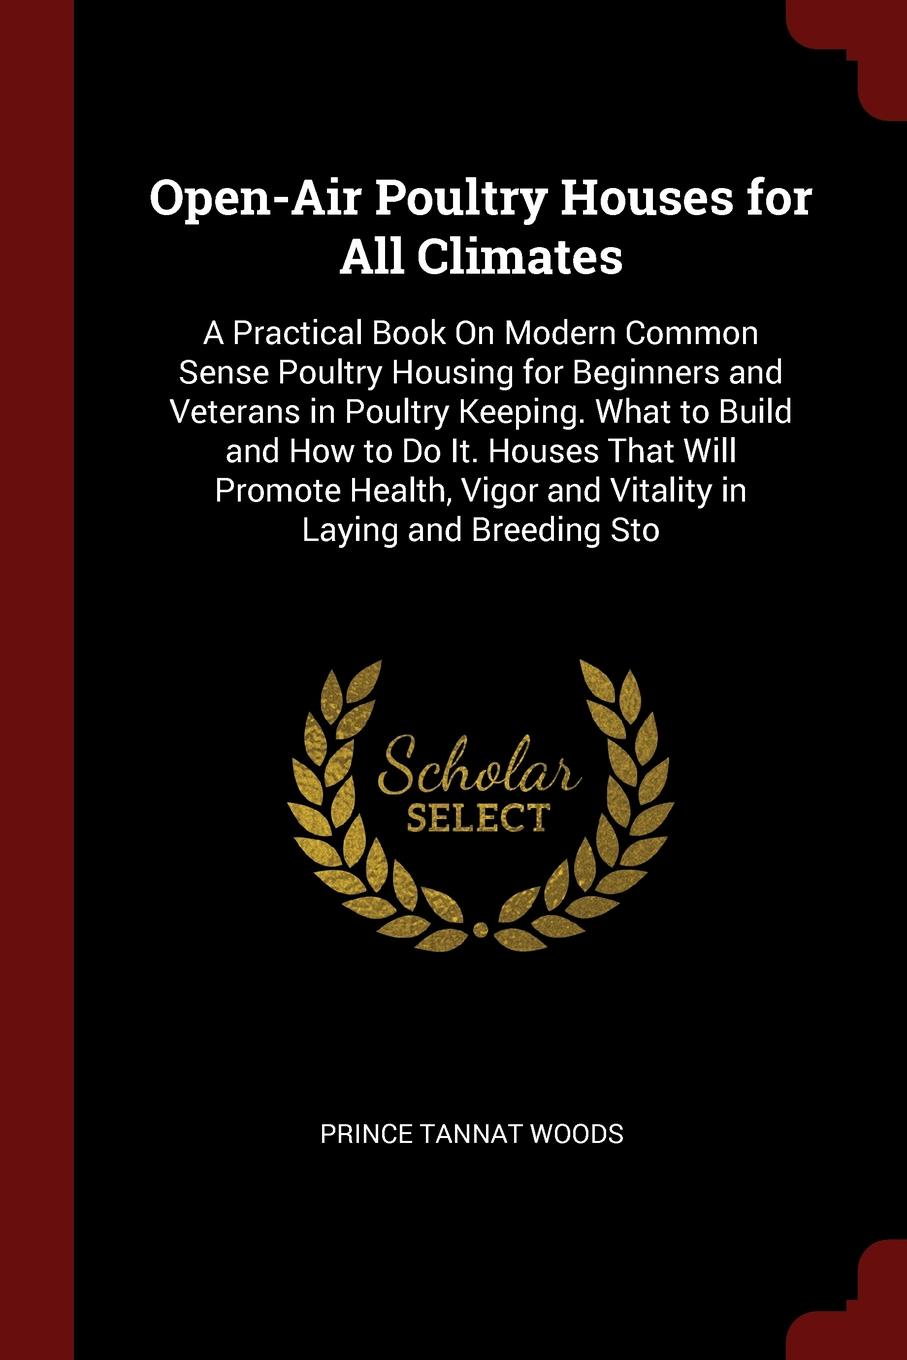 Open-Air Poultry Houses for All Climates. A Practical Book On Modern Common Sense Poultry Housing for Beginners and Veterans in Poultry Keeping. What to Build and How to Do It. Houses That Will Promote Health, Vigor and Vitality in Laying and Bree...